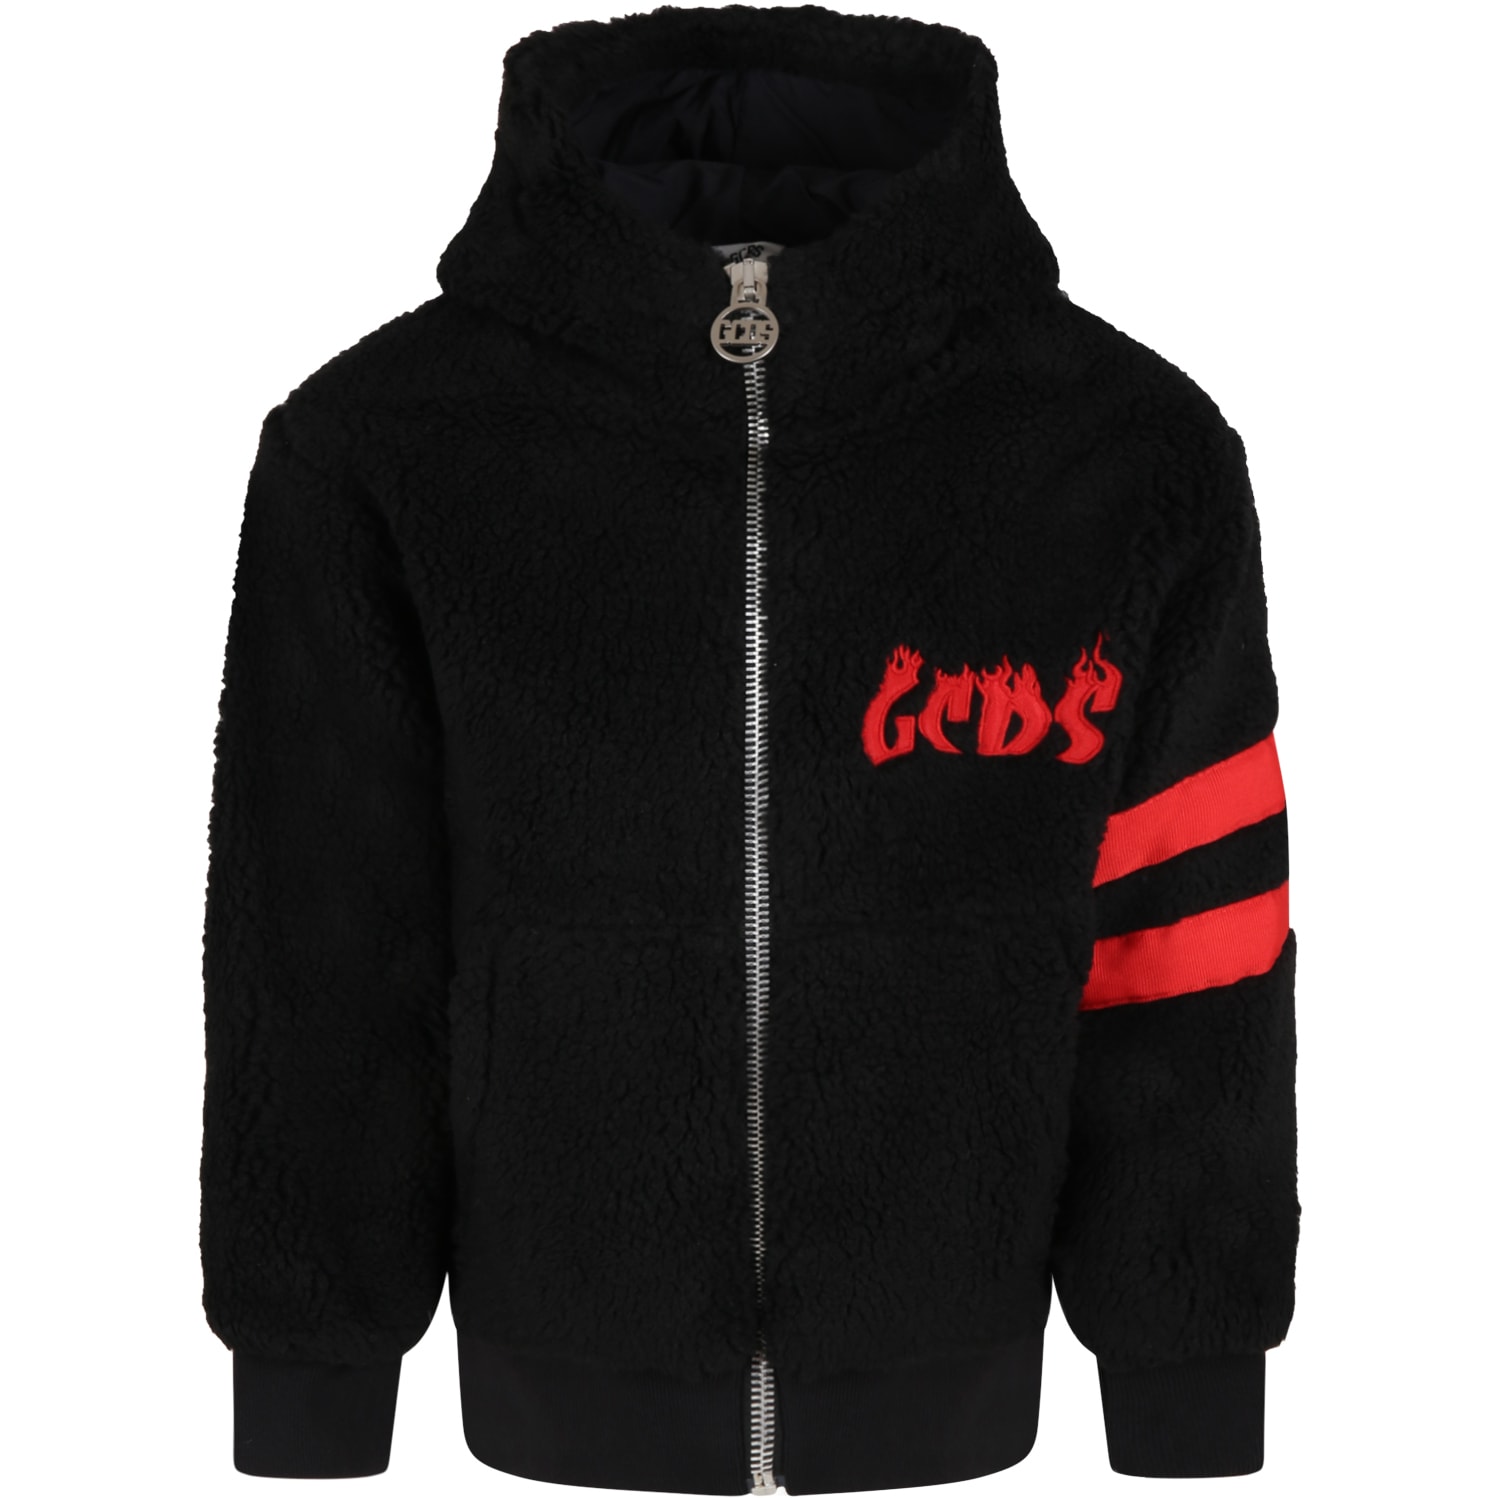 GCDS Mini Black Jacket For Kids With Red Logo